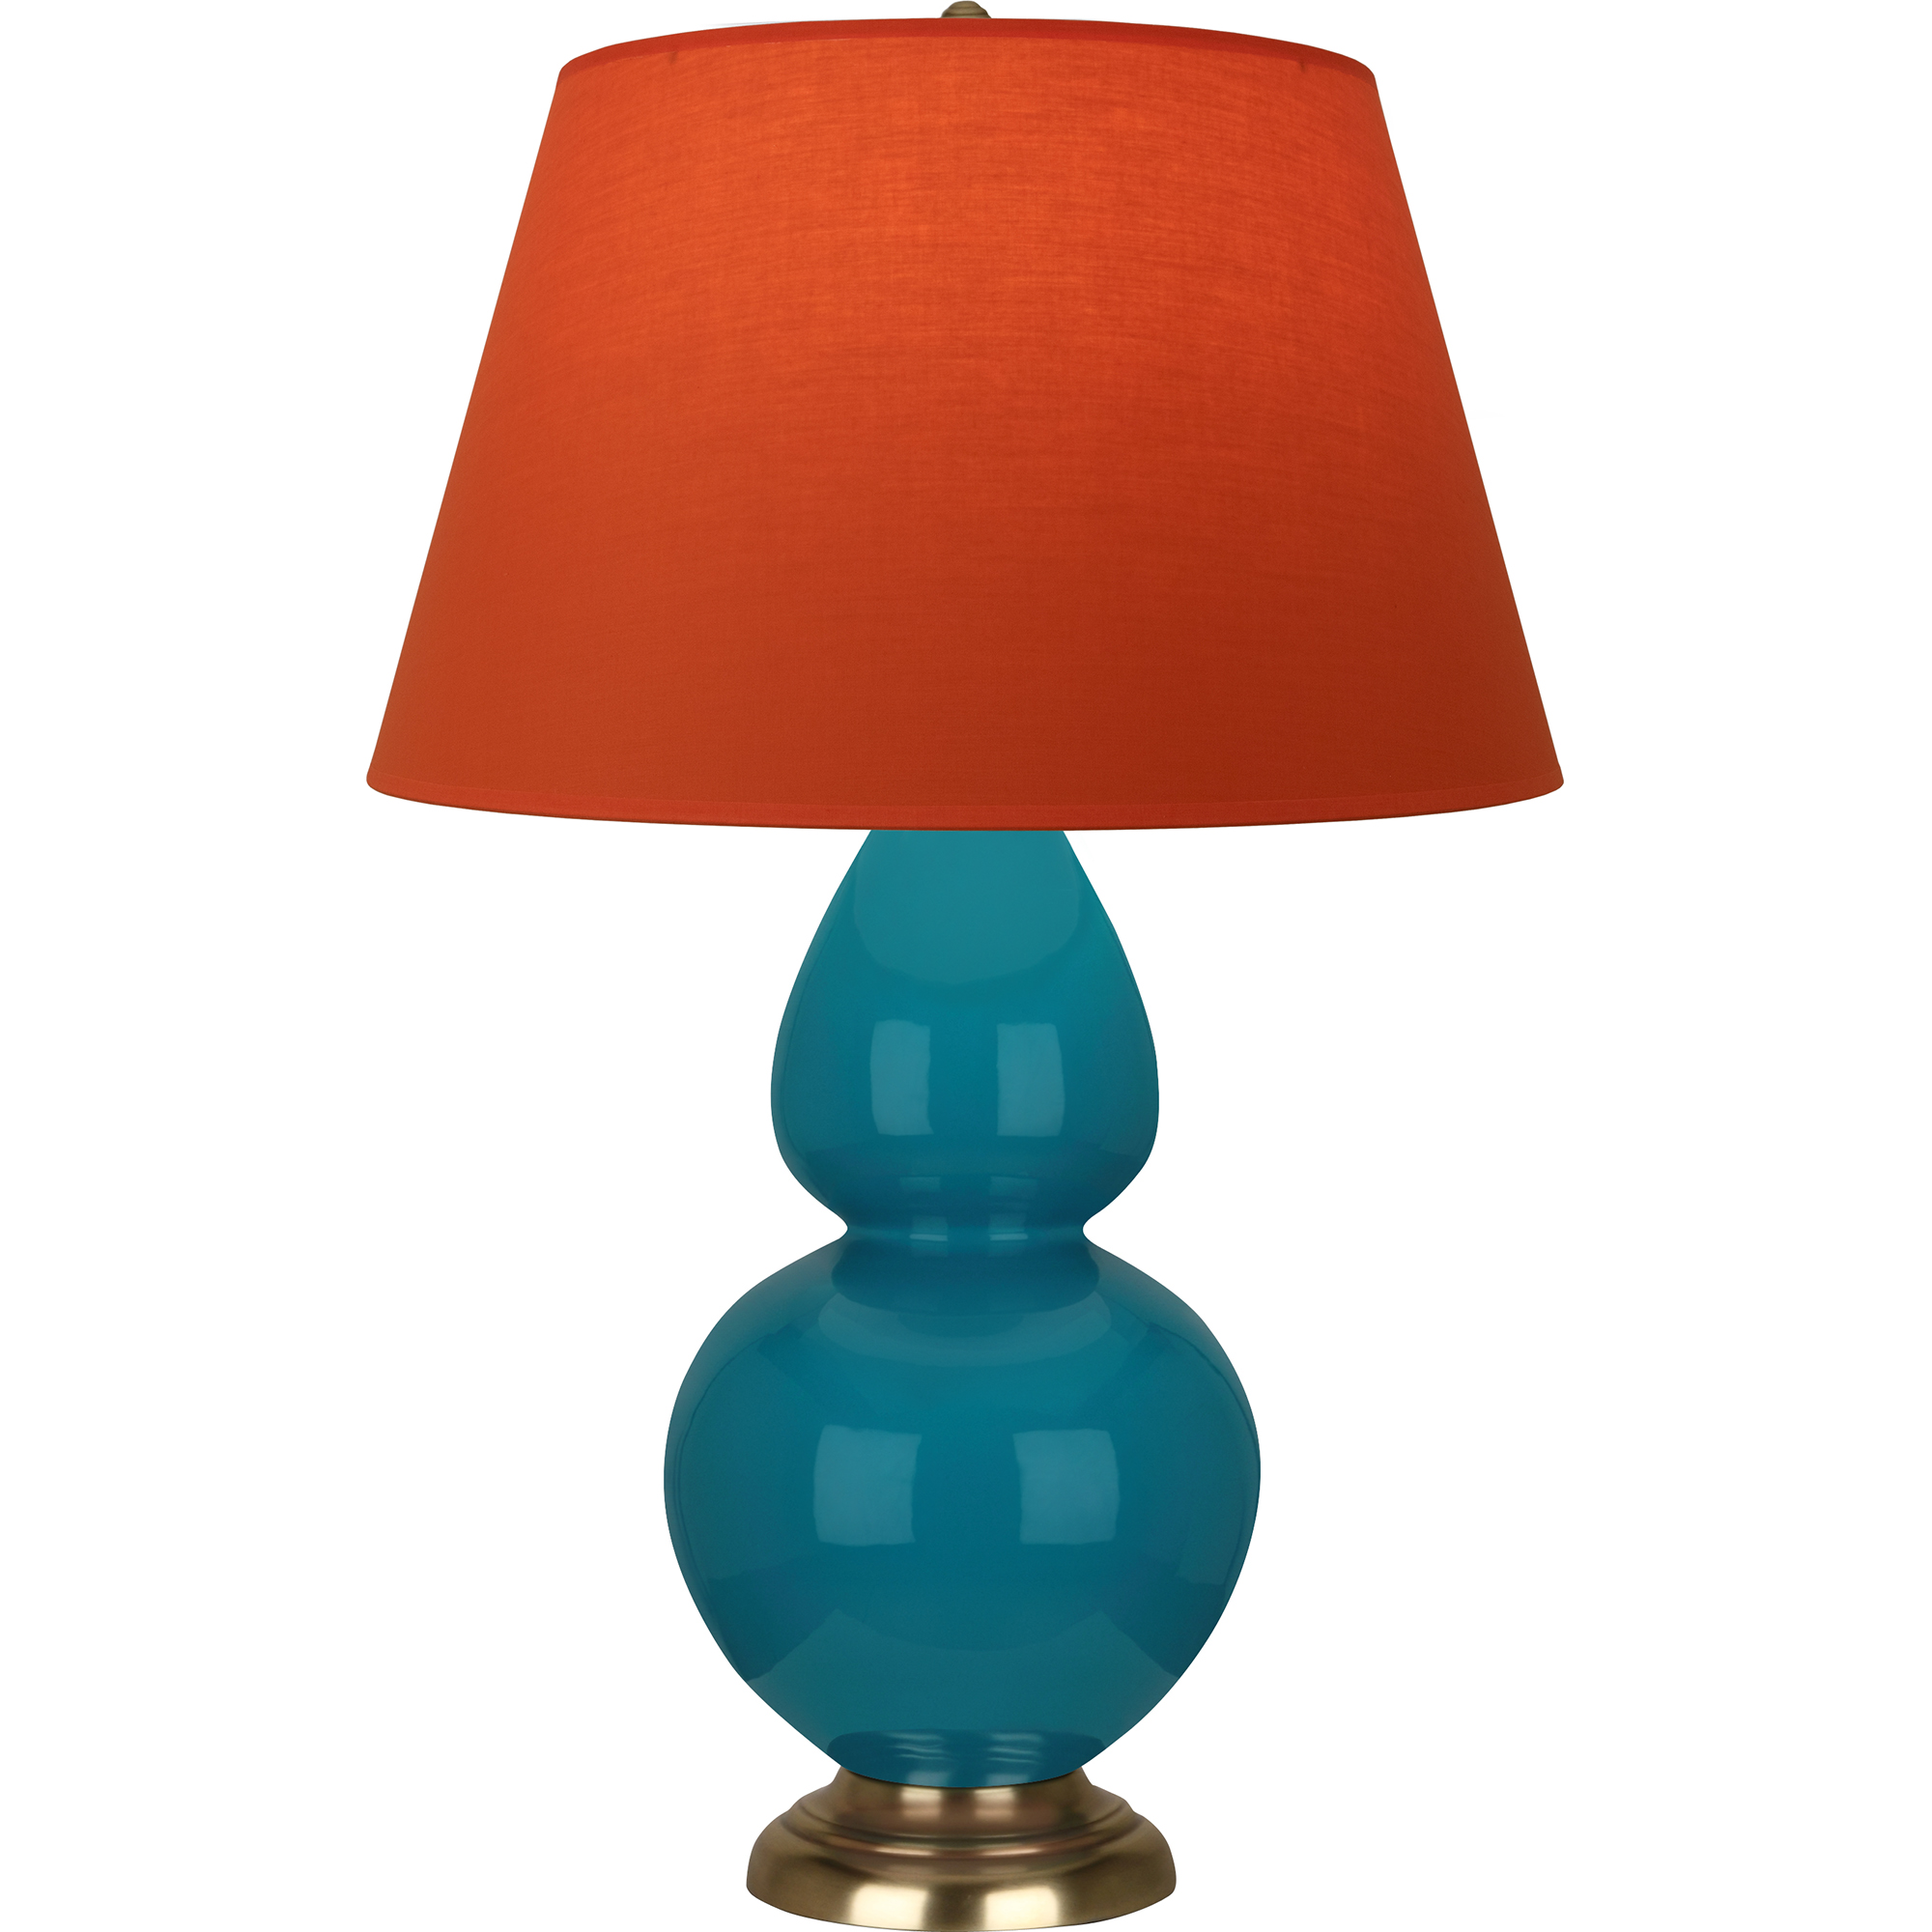 Double Gourd Table Lamp Style #1751T